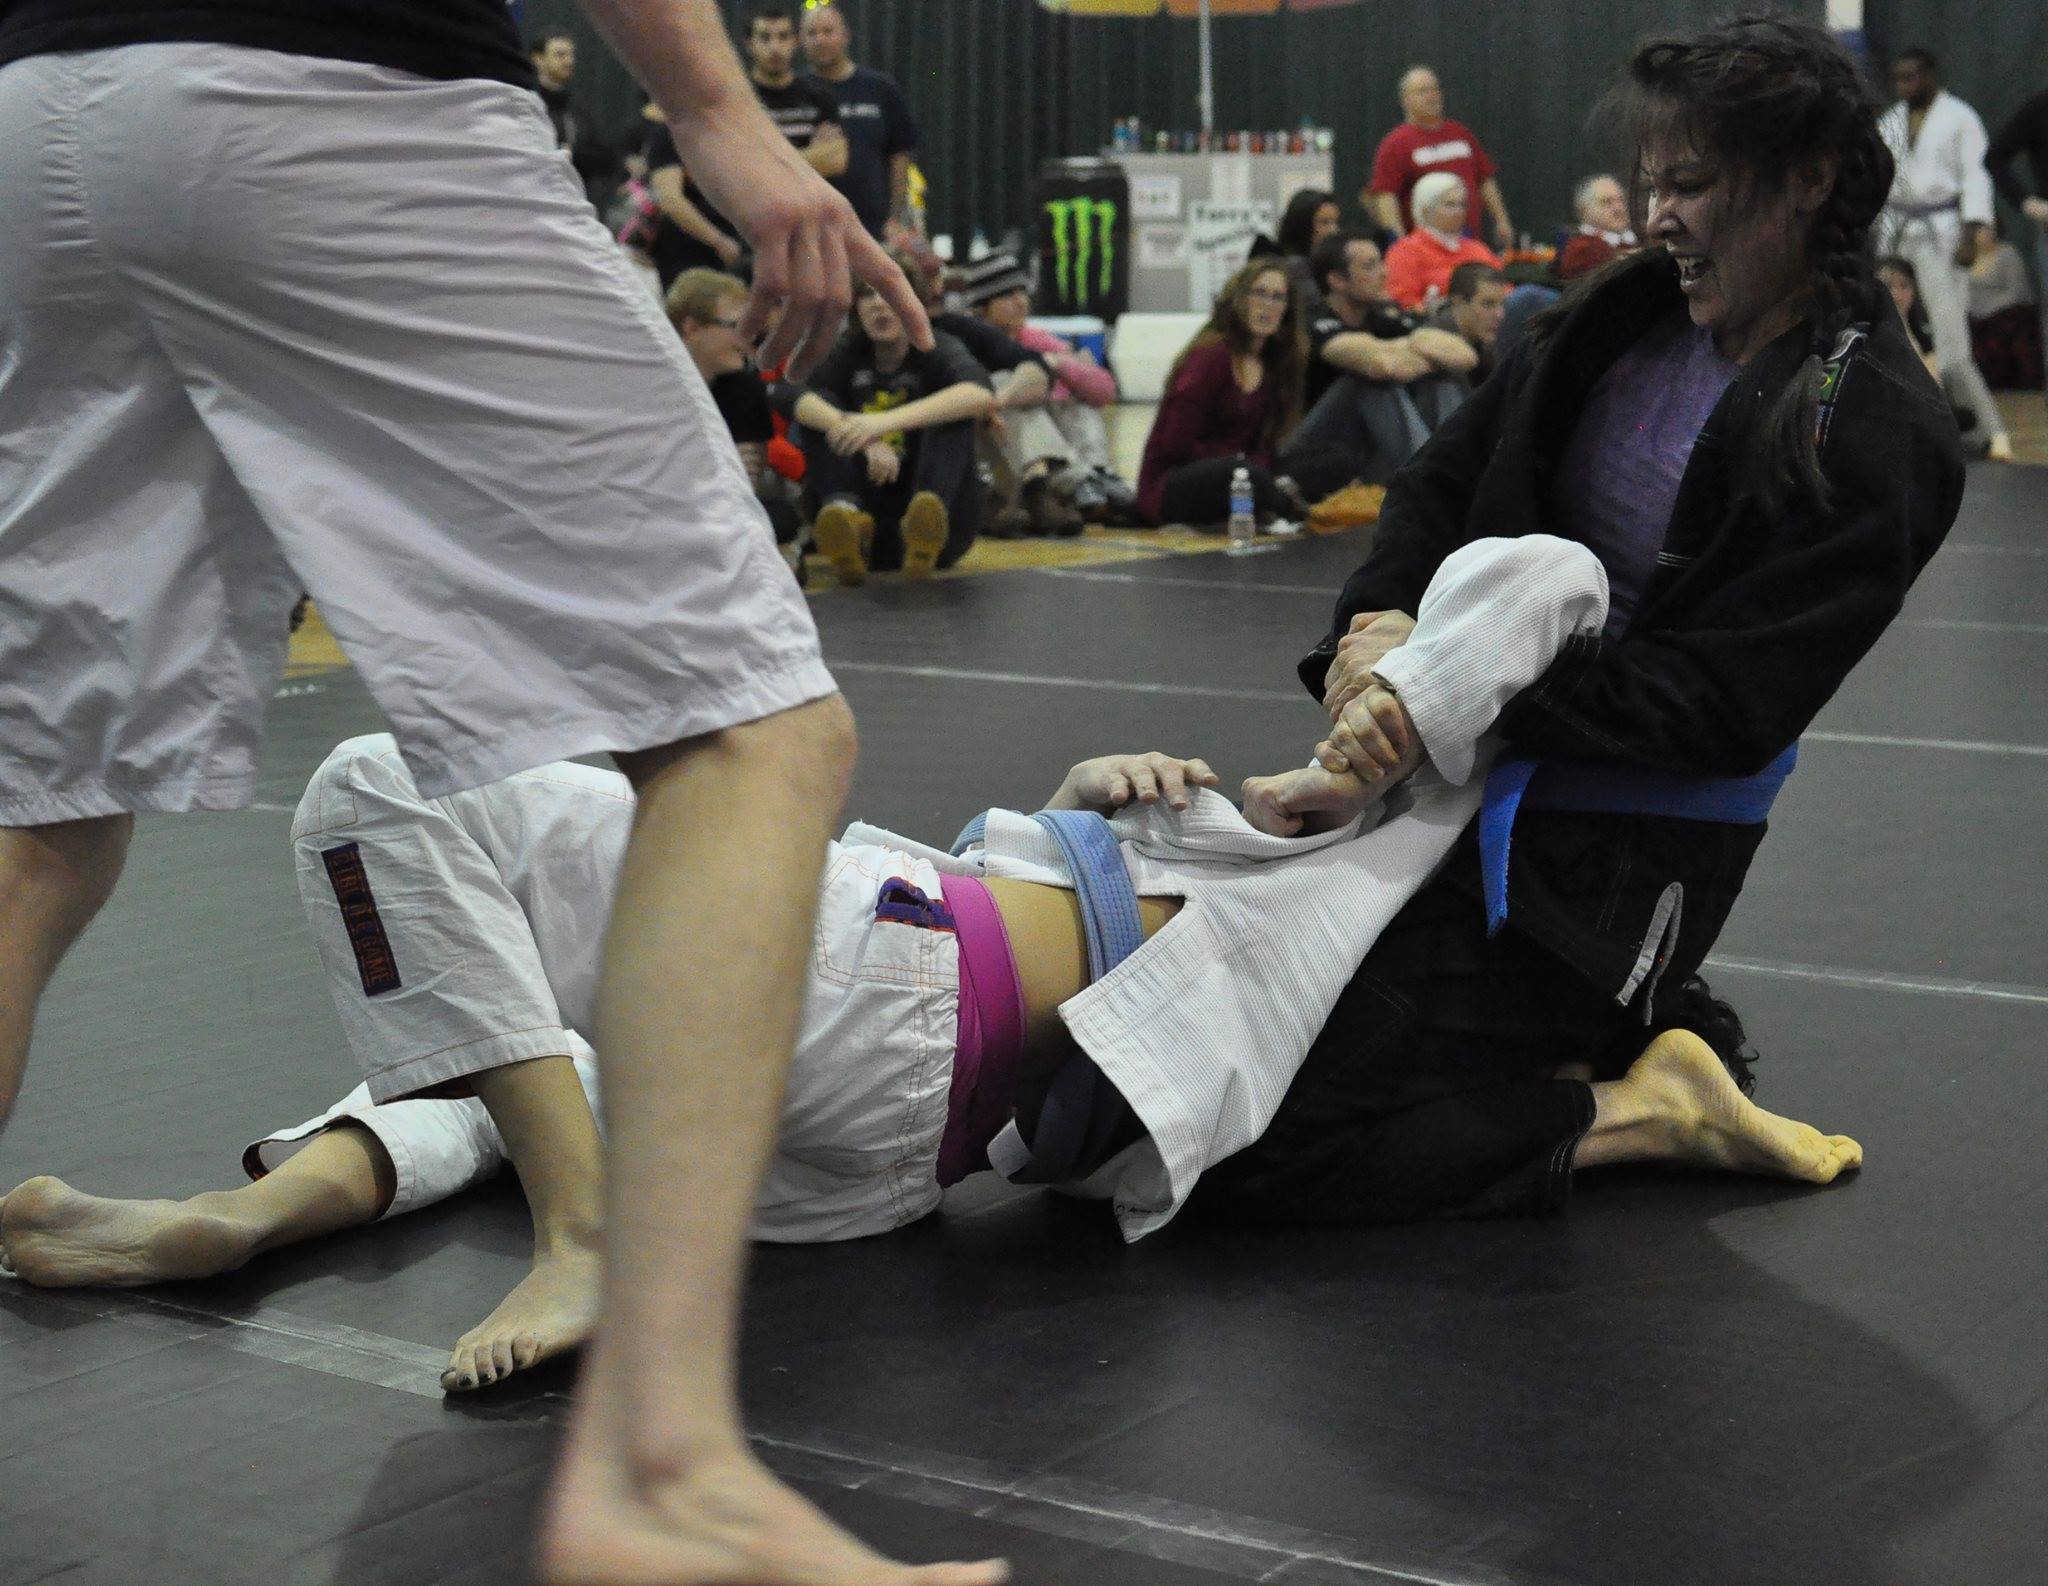 BJJ Submissions: The Importance, Categories, and Tapping